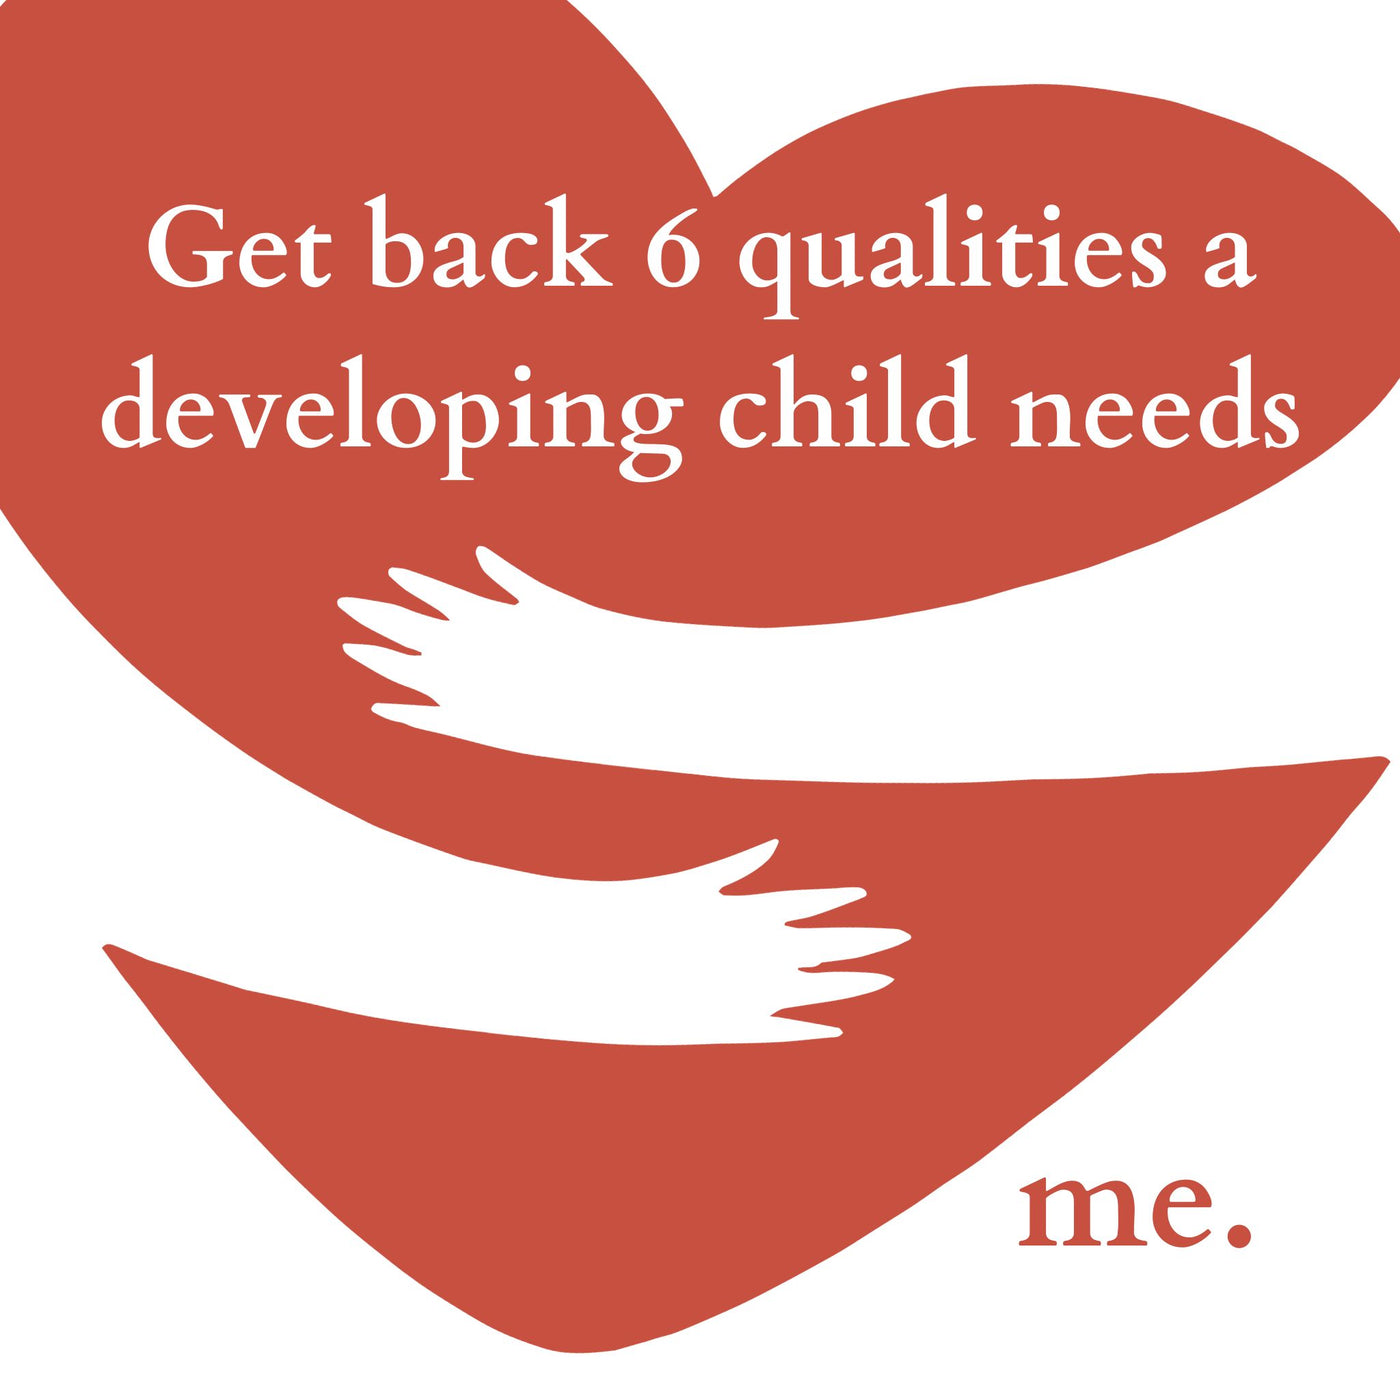 Restore 6 qualities a developing child needs with this Bio Awareness Hack